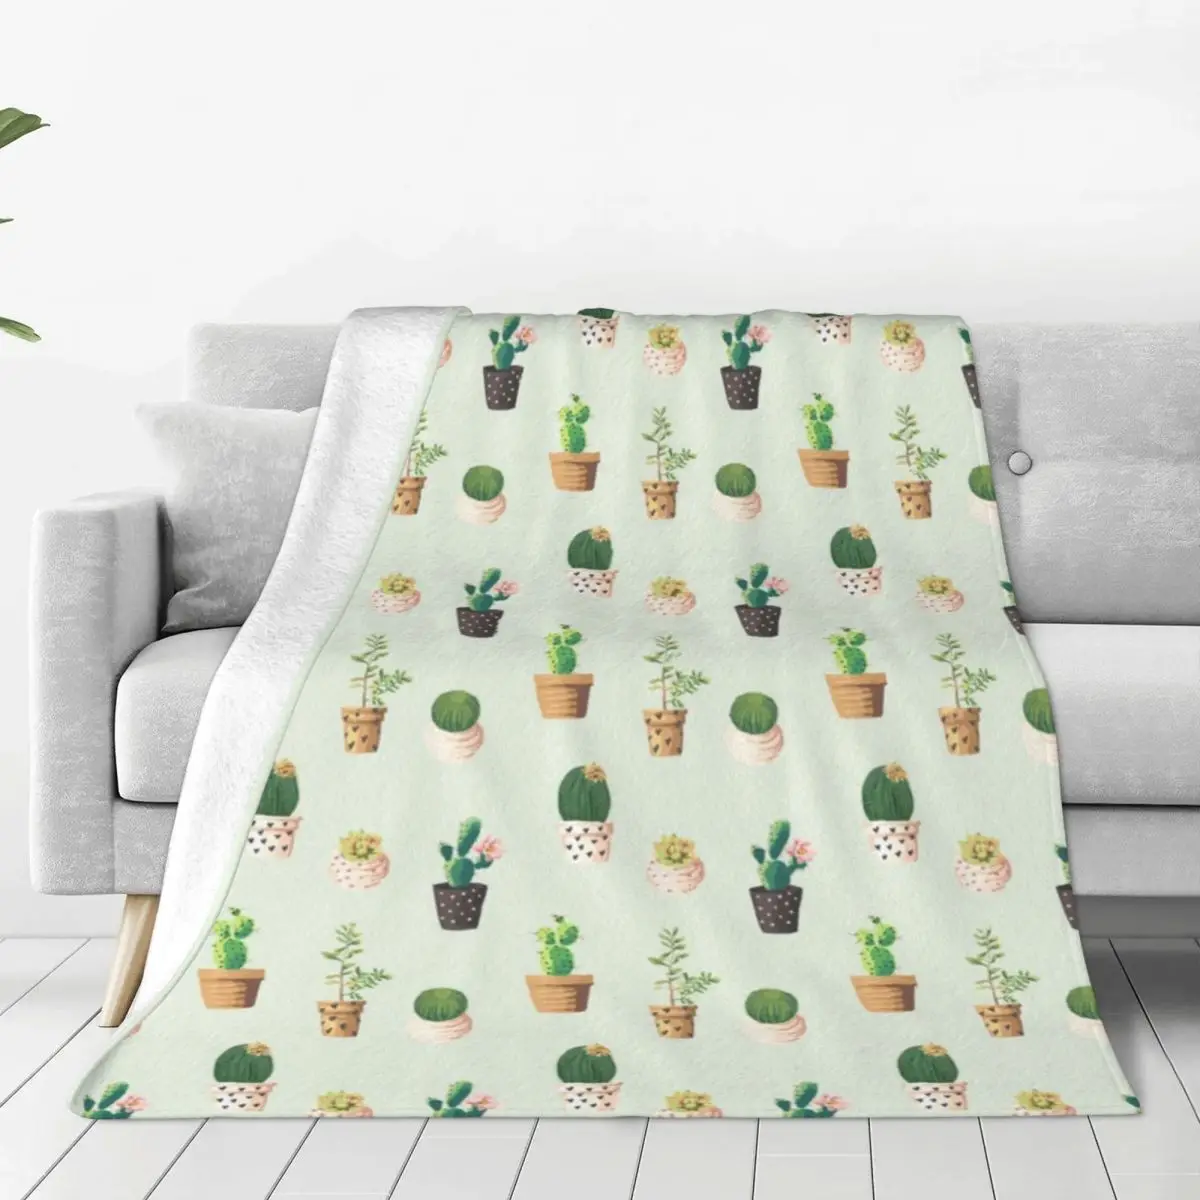 Cactus Printed Blanket pattern unique variety Soft Cheap Bedspread Decorative Fleece For Photo Shoot Blanket